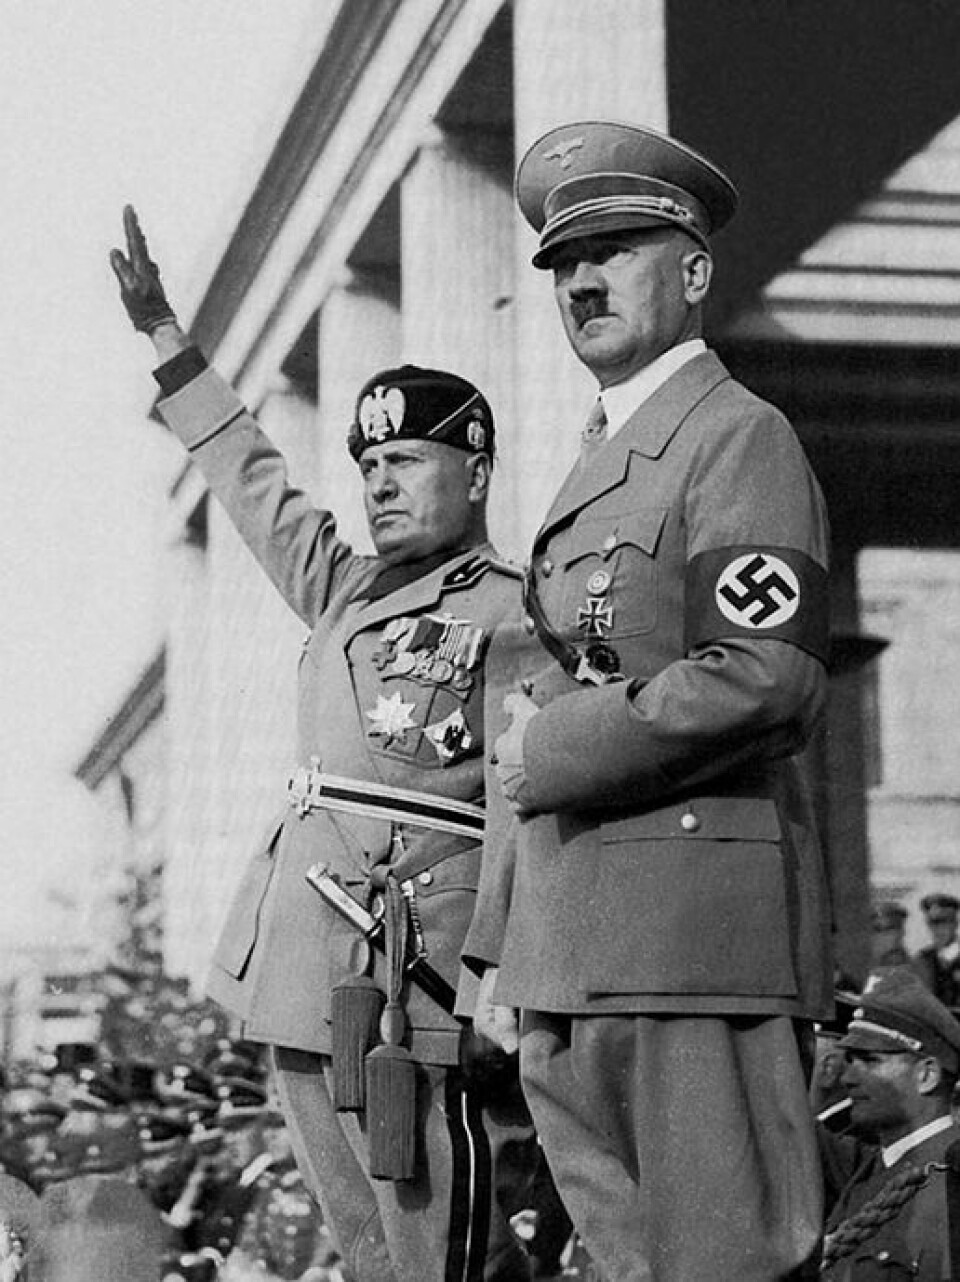 Dictatorships do not emerge overnight. Both Benito Mussolini (left) and Adolf Hitler came to power democratically, and then turned Italy and Germany into dictatorships.